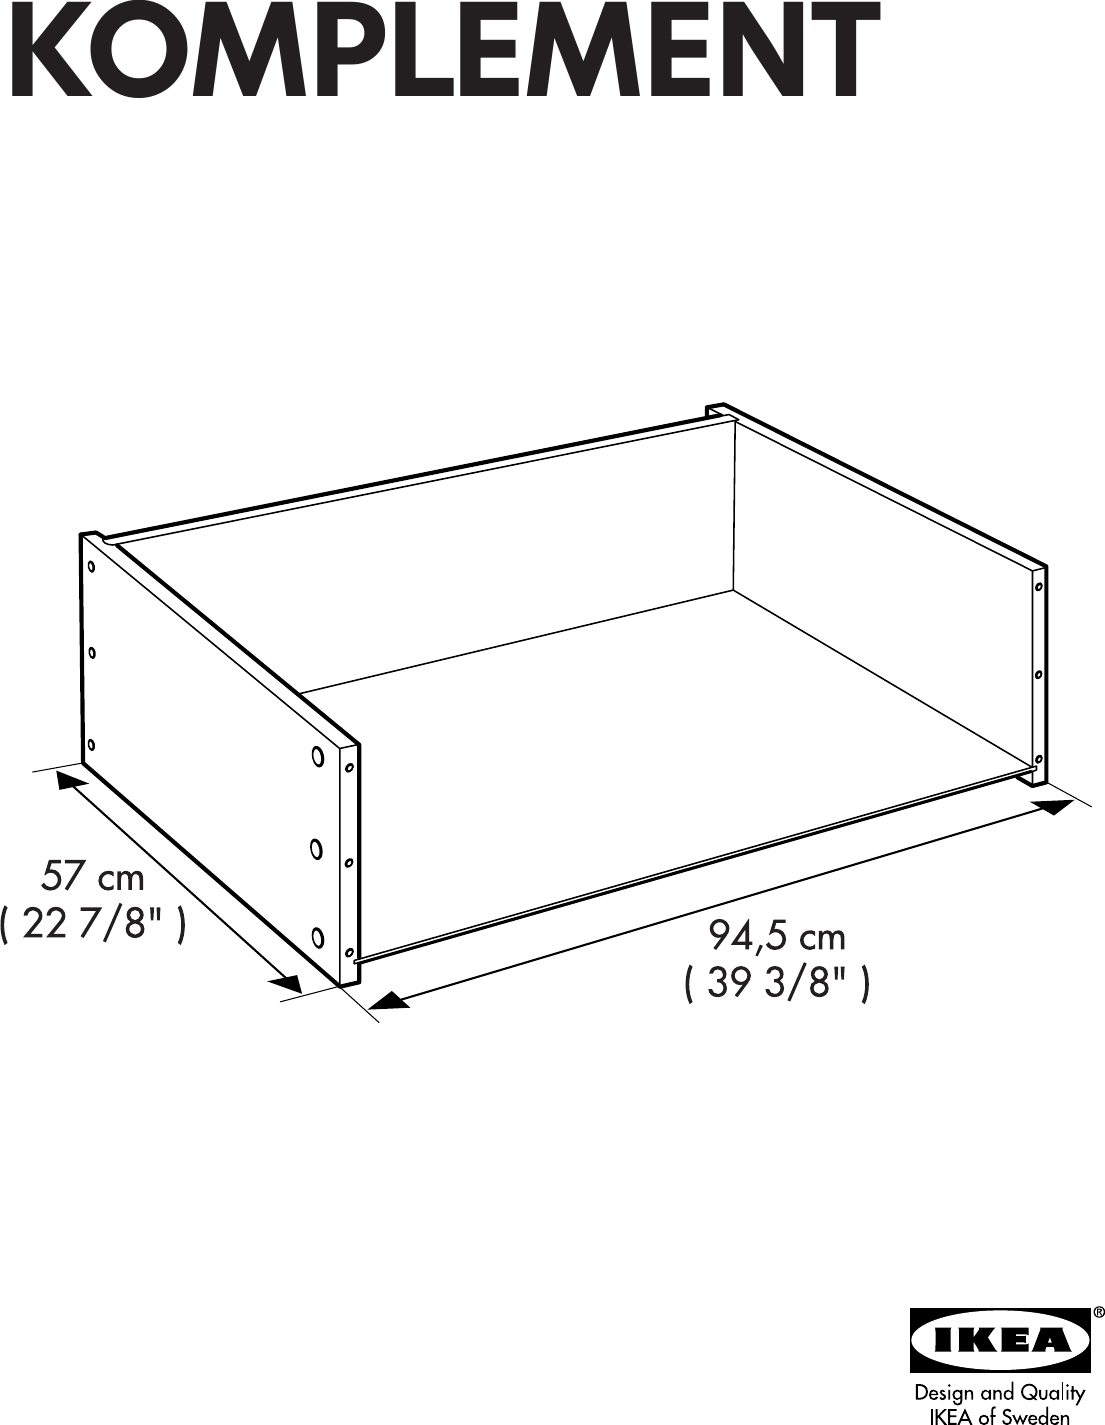 Ikea Komplement Drawer W O Front 39X23X14 Assembly Instruction